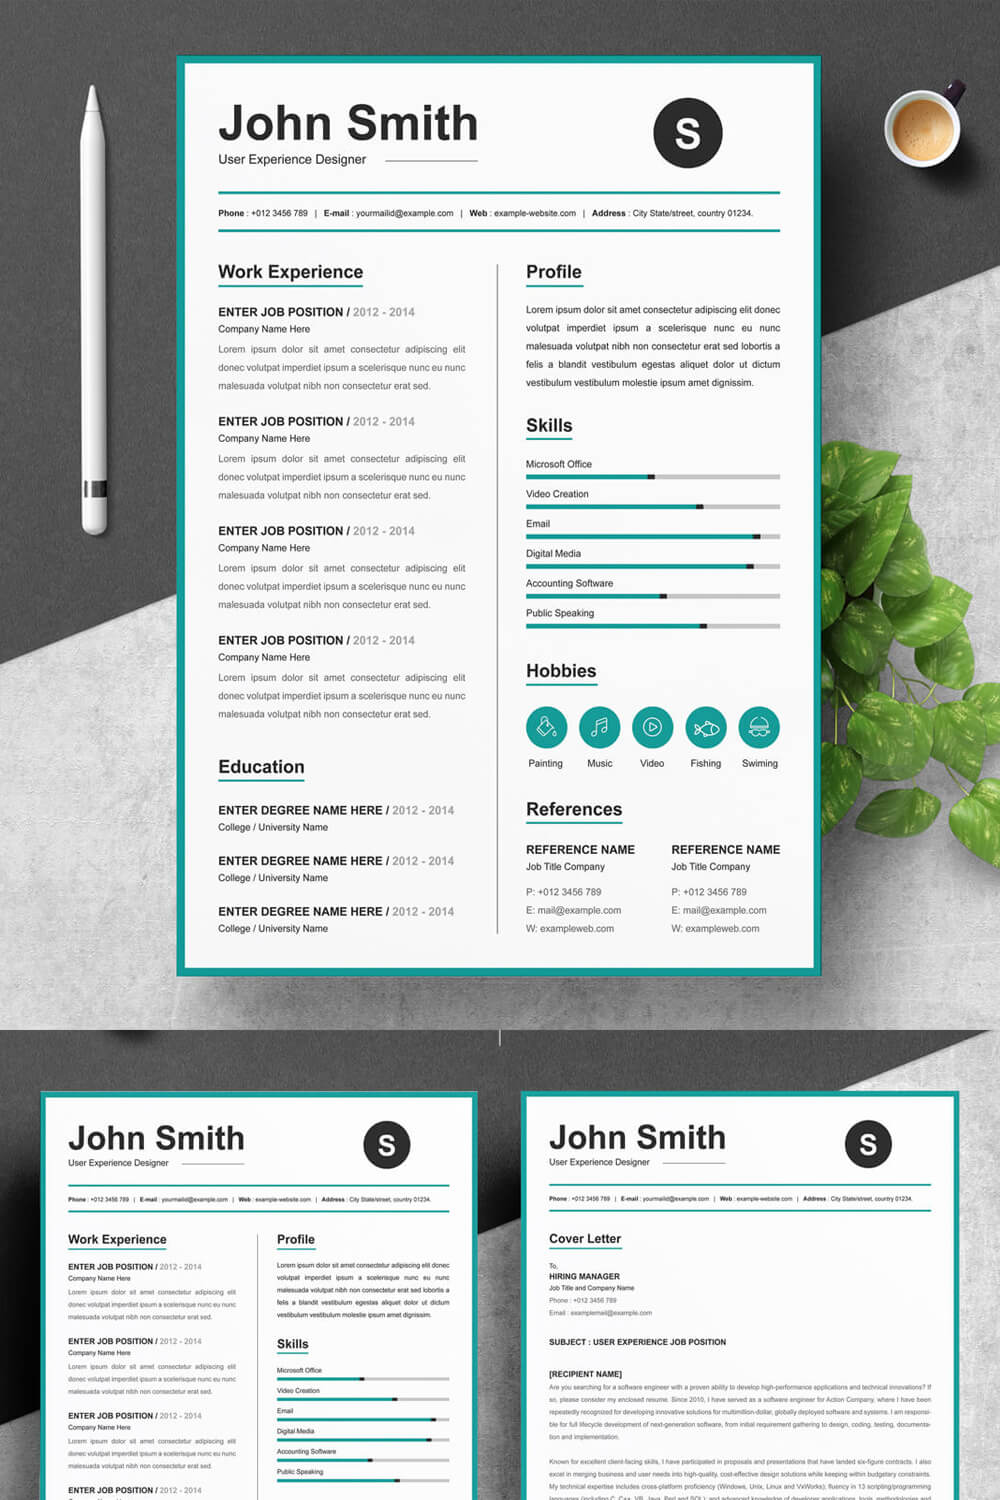 Clean and professional resume template with a blue border.